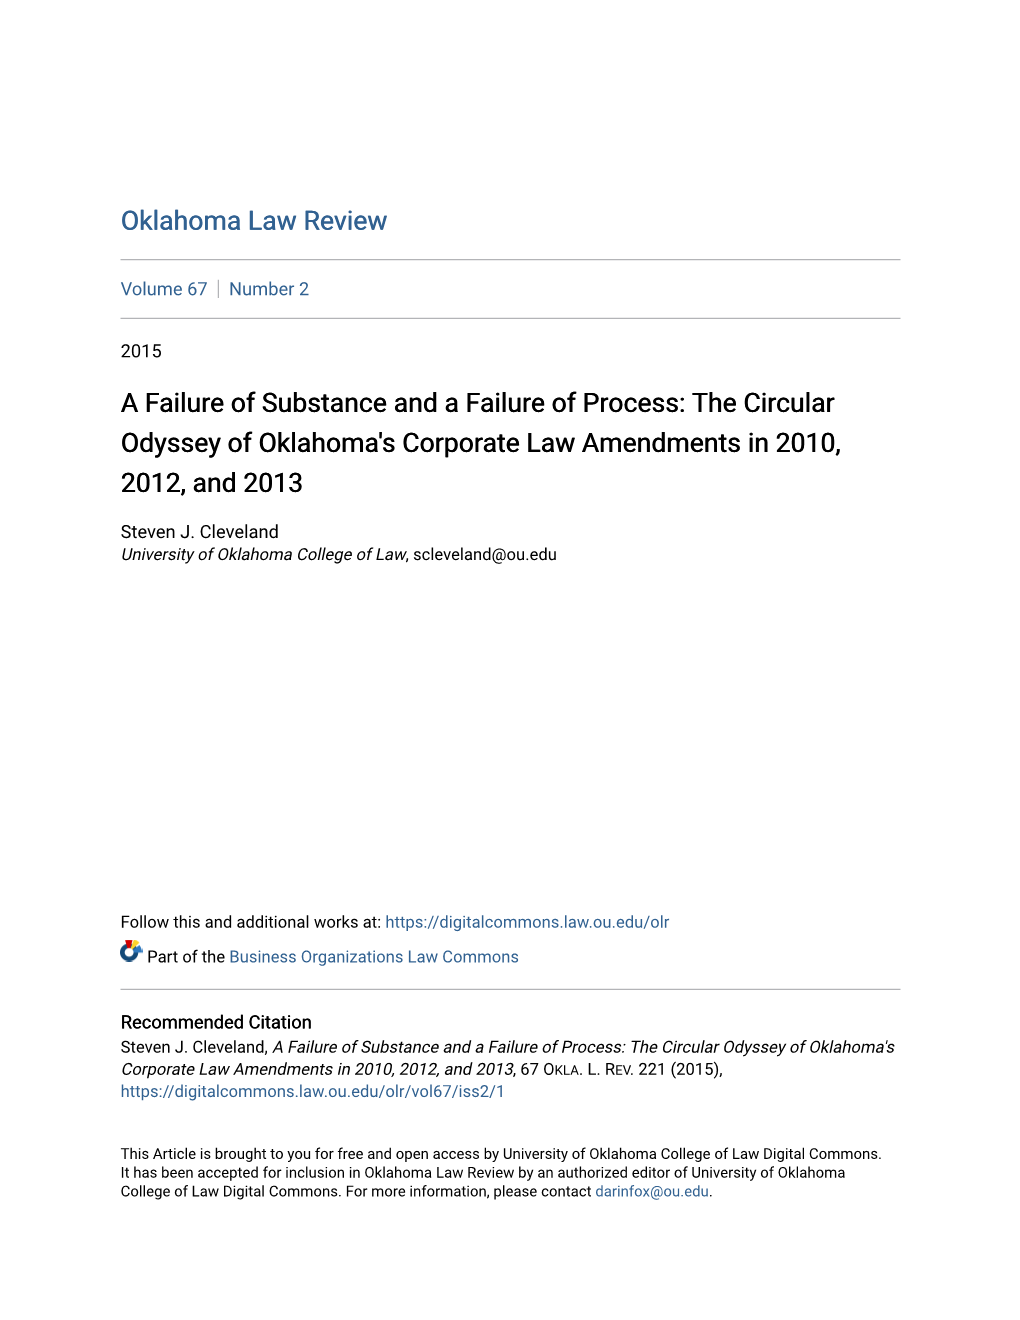 A Failure of Substance and a Failure of Process: the Circular Odyssey of Oklahoma's Corporate Law Amendments in 2010, 2012, and 2013